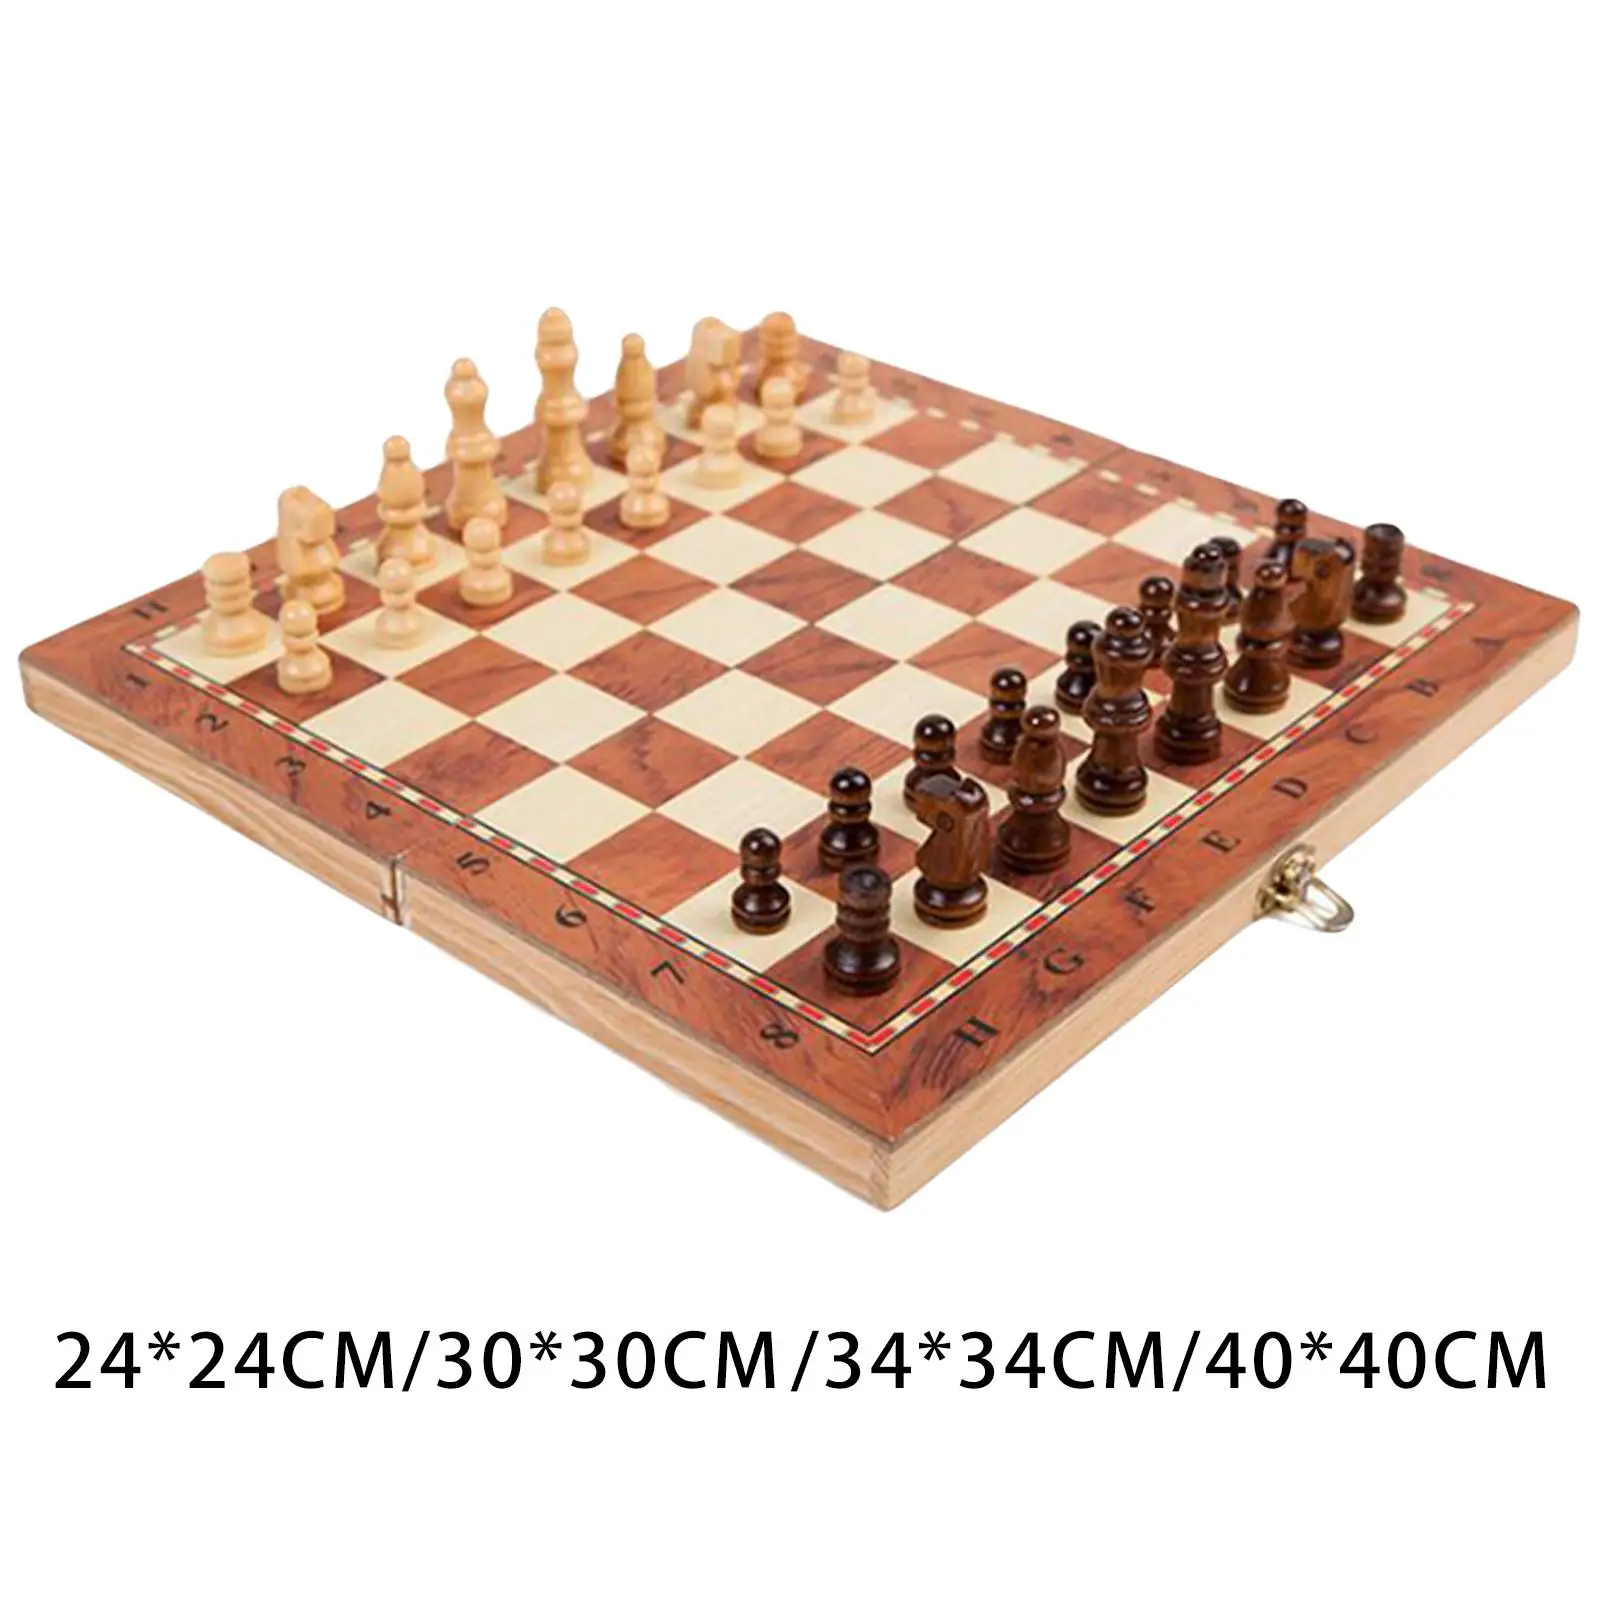 Handmade Wood Chess Set Lightweight Board Game  Foldable Packaged Educational Toy Table Piel for  Chess